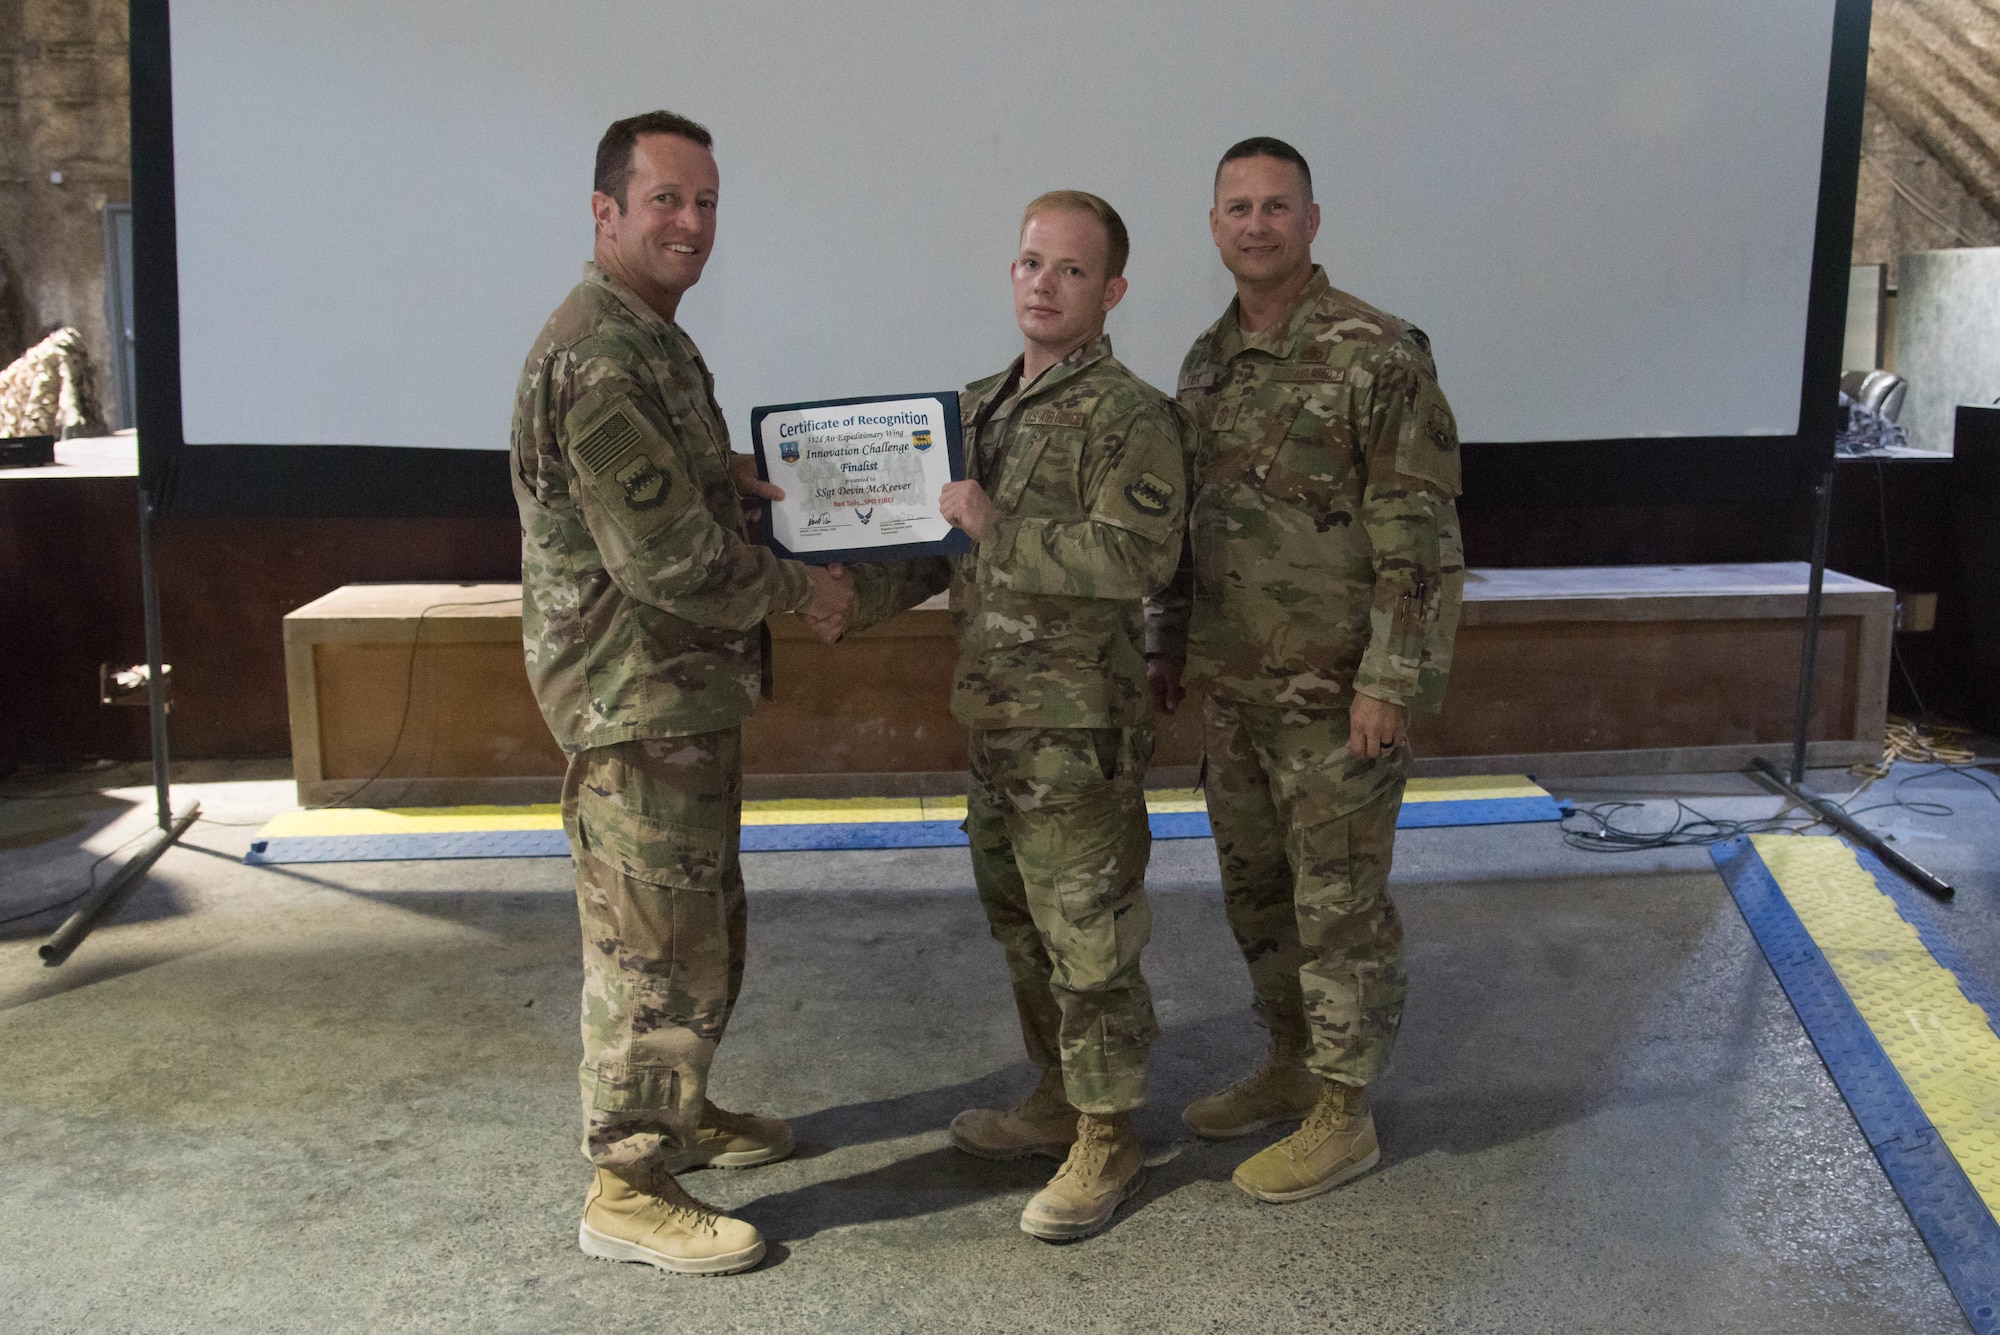 Brig. Gen. David Iverson, 332nd Air Expeditionary Wing commander, and Chief Master Sgt. Jason Tiek, 332nd AEW command chief, present the Red Tails Commander’s Innovation Challenge runner-up certificate to Staff Sgt. Devin McKeever, 332nd Expeditionary Maintenance Squadron fuel systems craftsman, Sept. 28, 2018, at an undisclosed location in Southwest Asia.